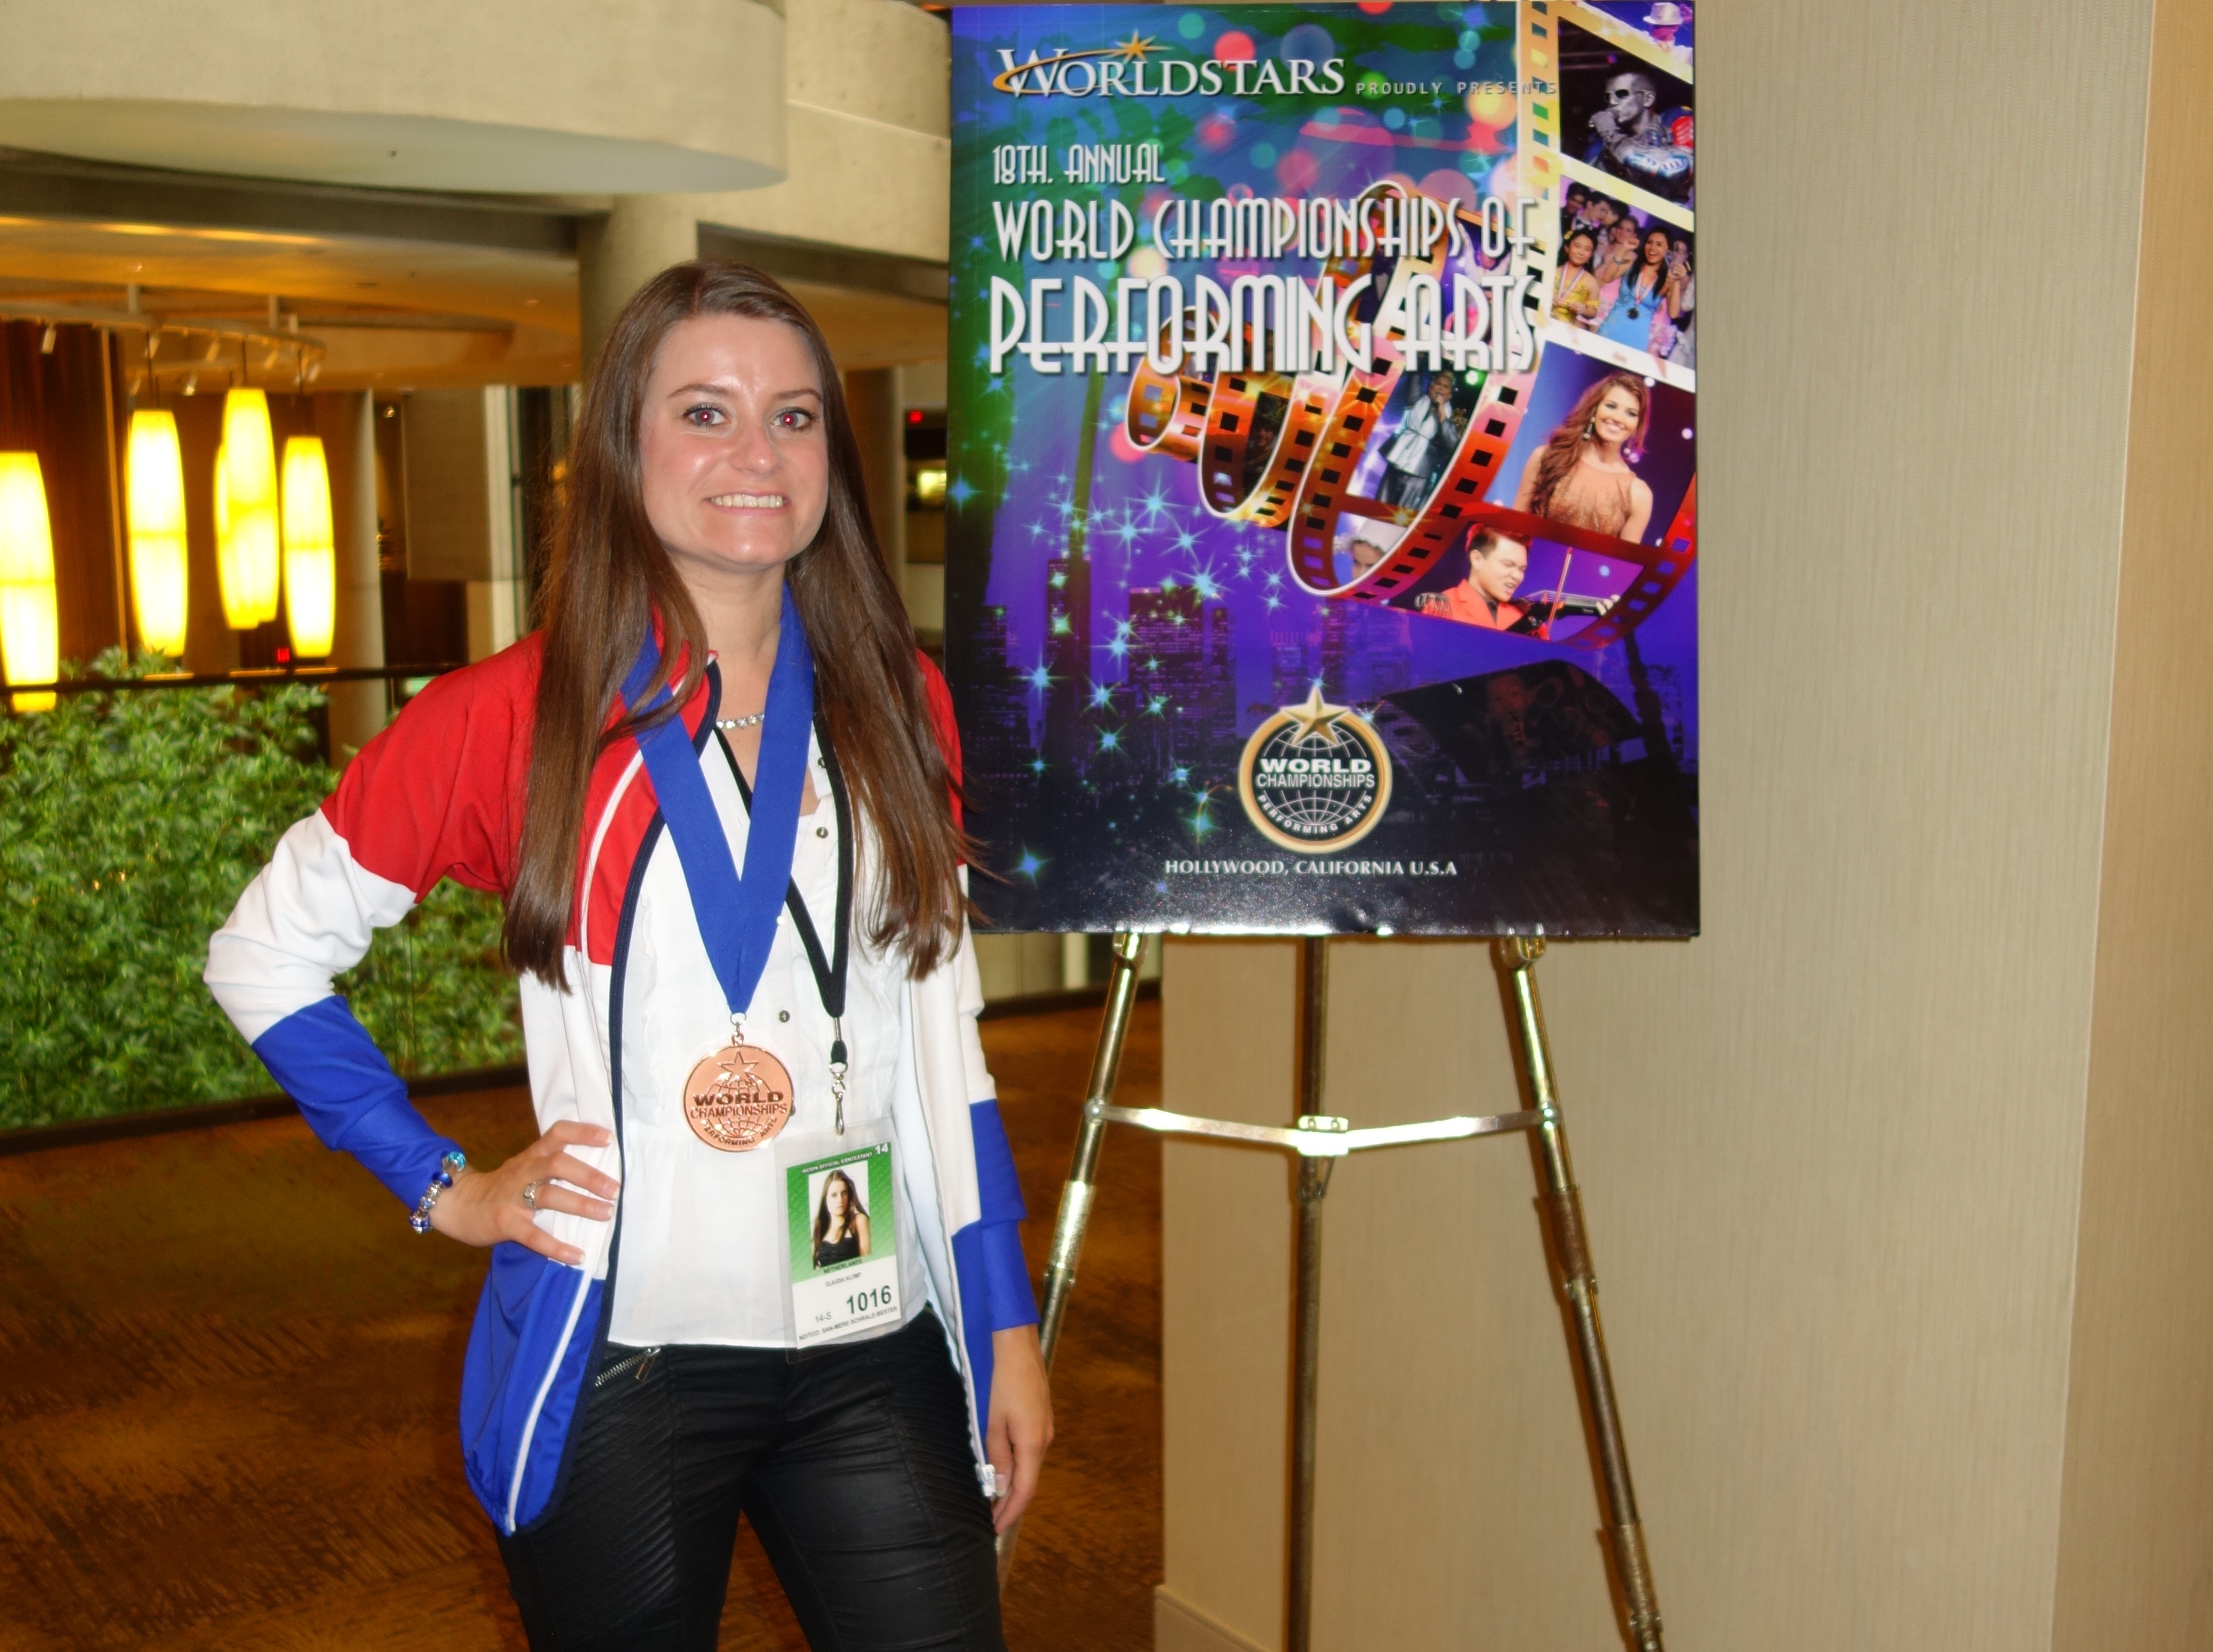 Bronze medal winner of acting classical at the World Championships of Performing Arts in Hollywood